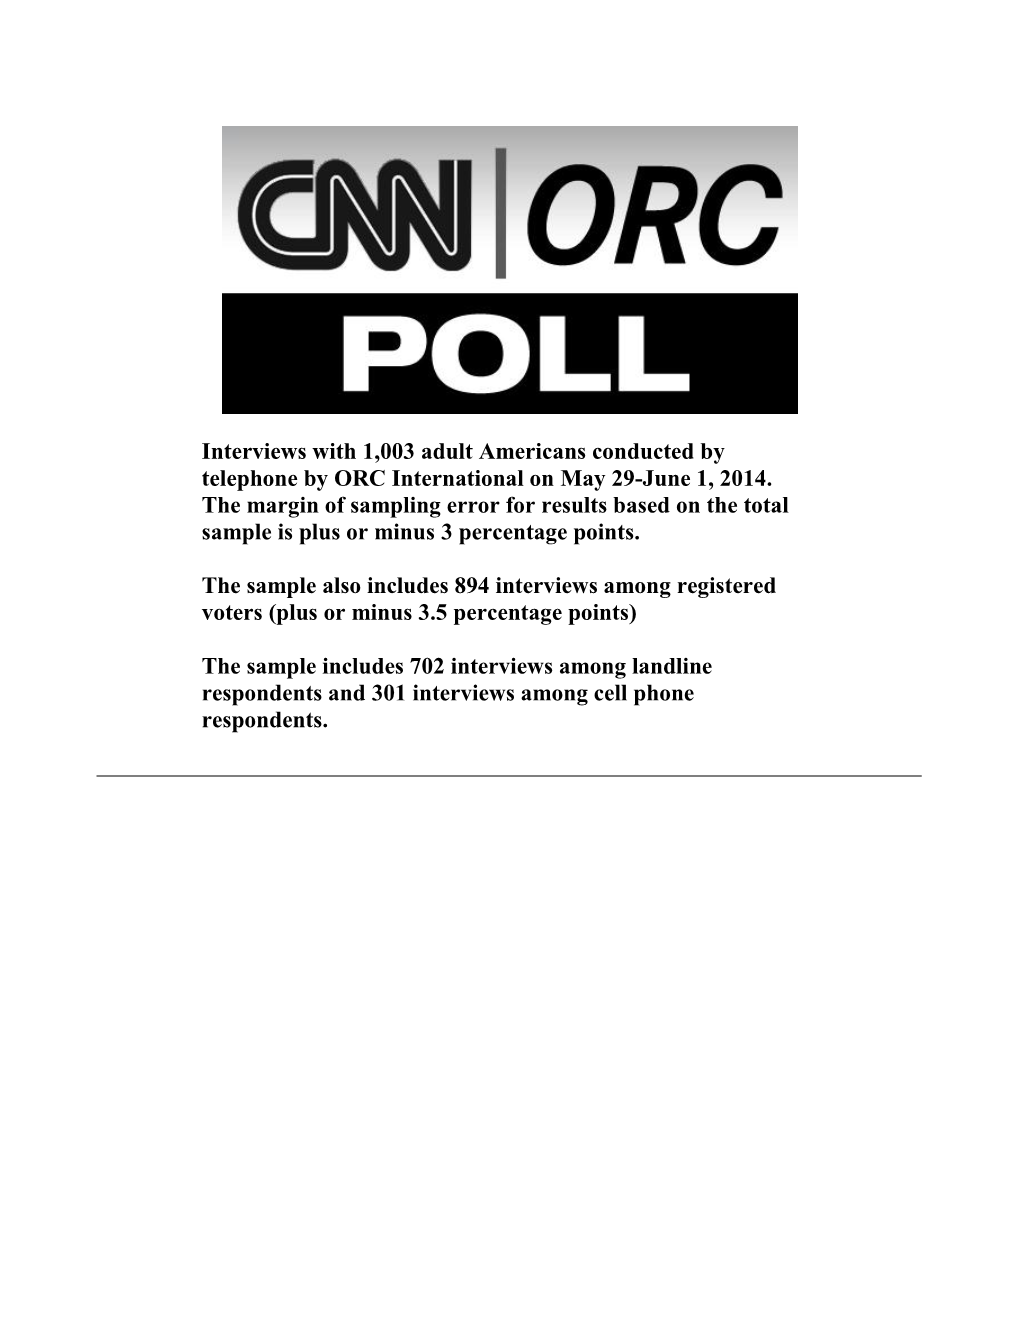 CNN/ORC International Poll -- May 29 to June 1, 2014